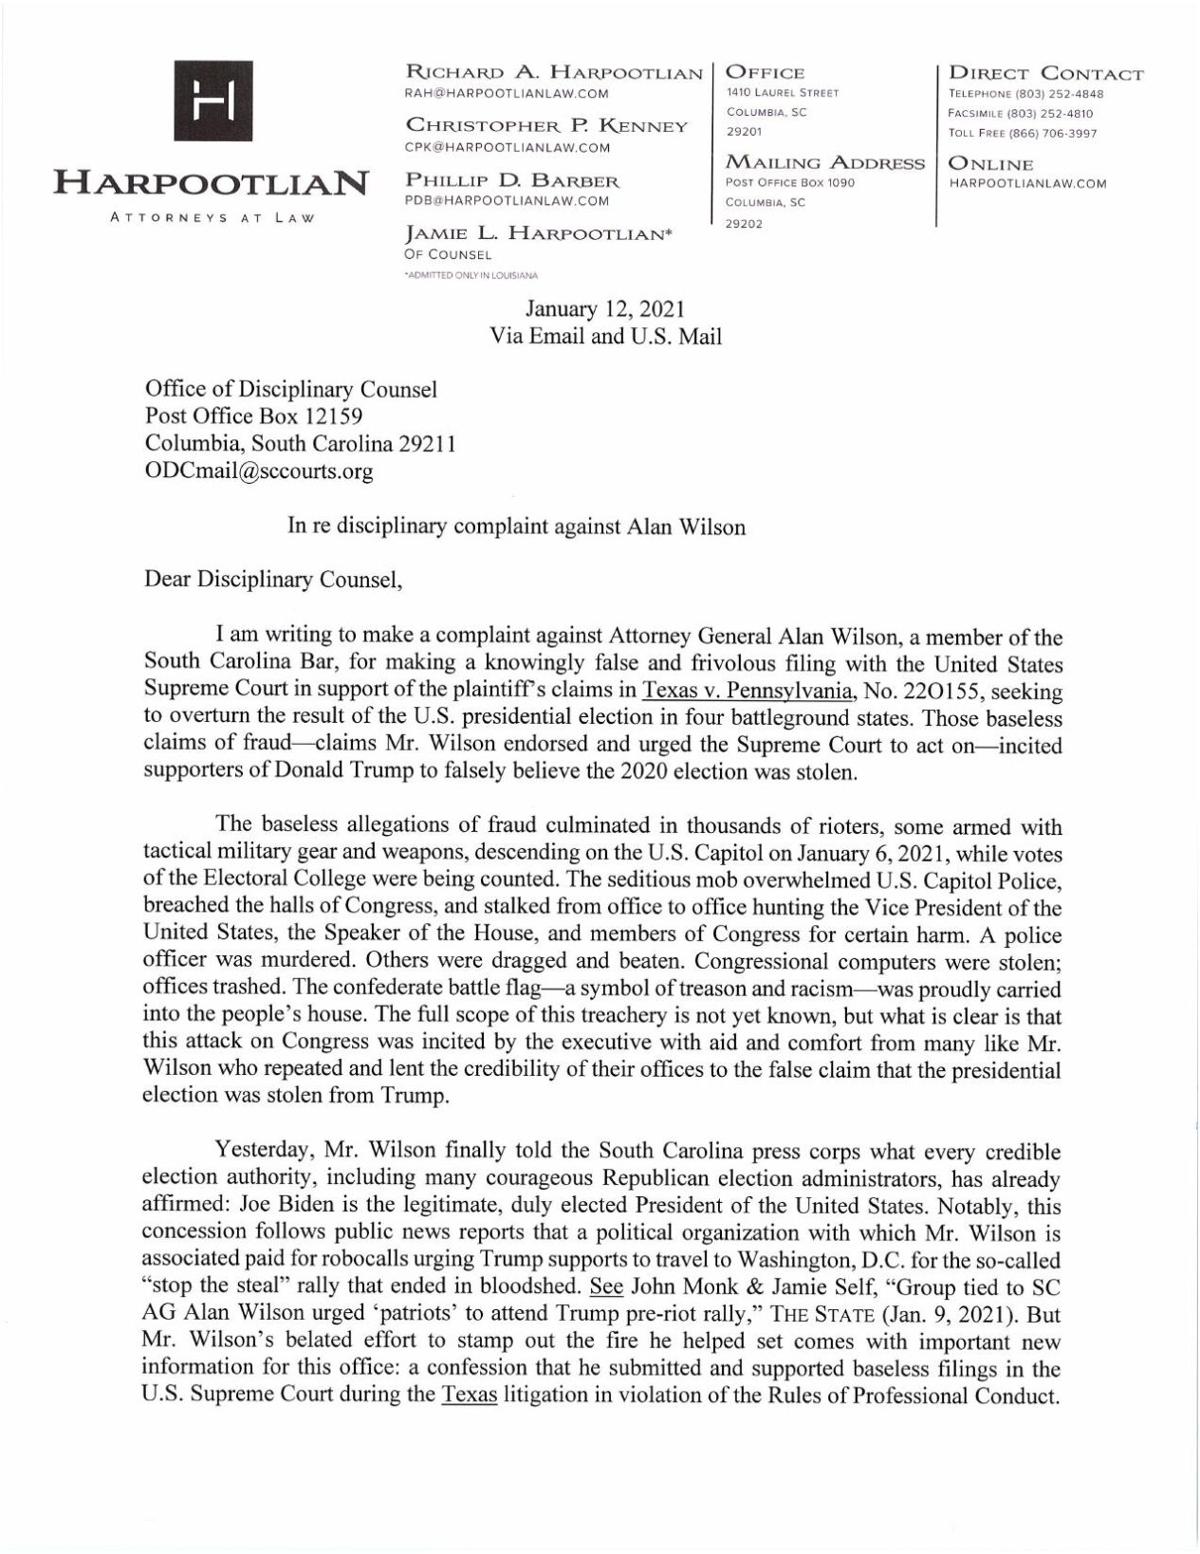 Full text of the complaint against Attorney General Alan Wilson to the Office of Disciplinary Counsel